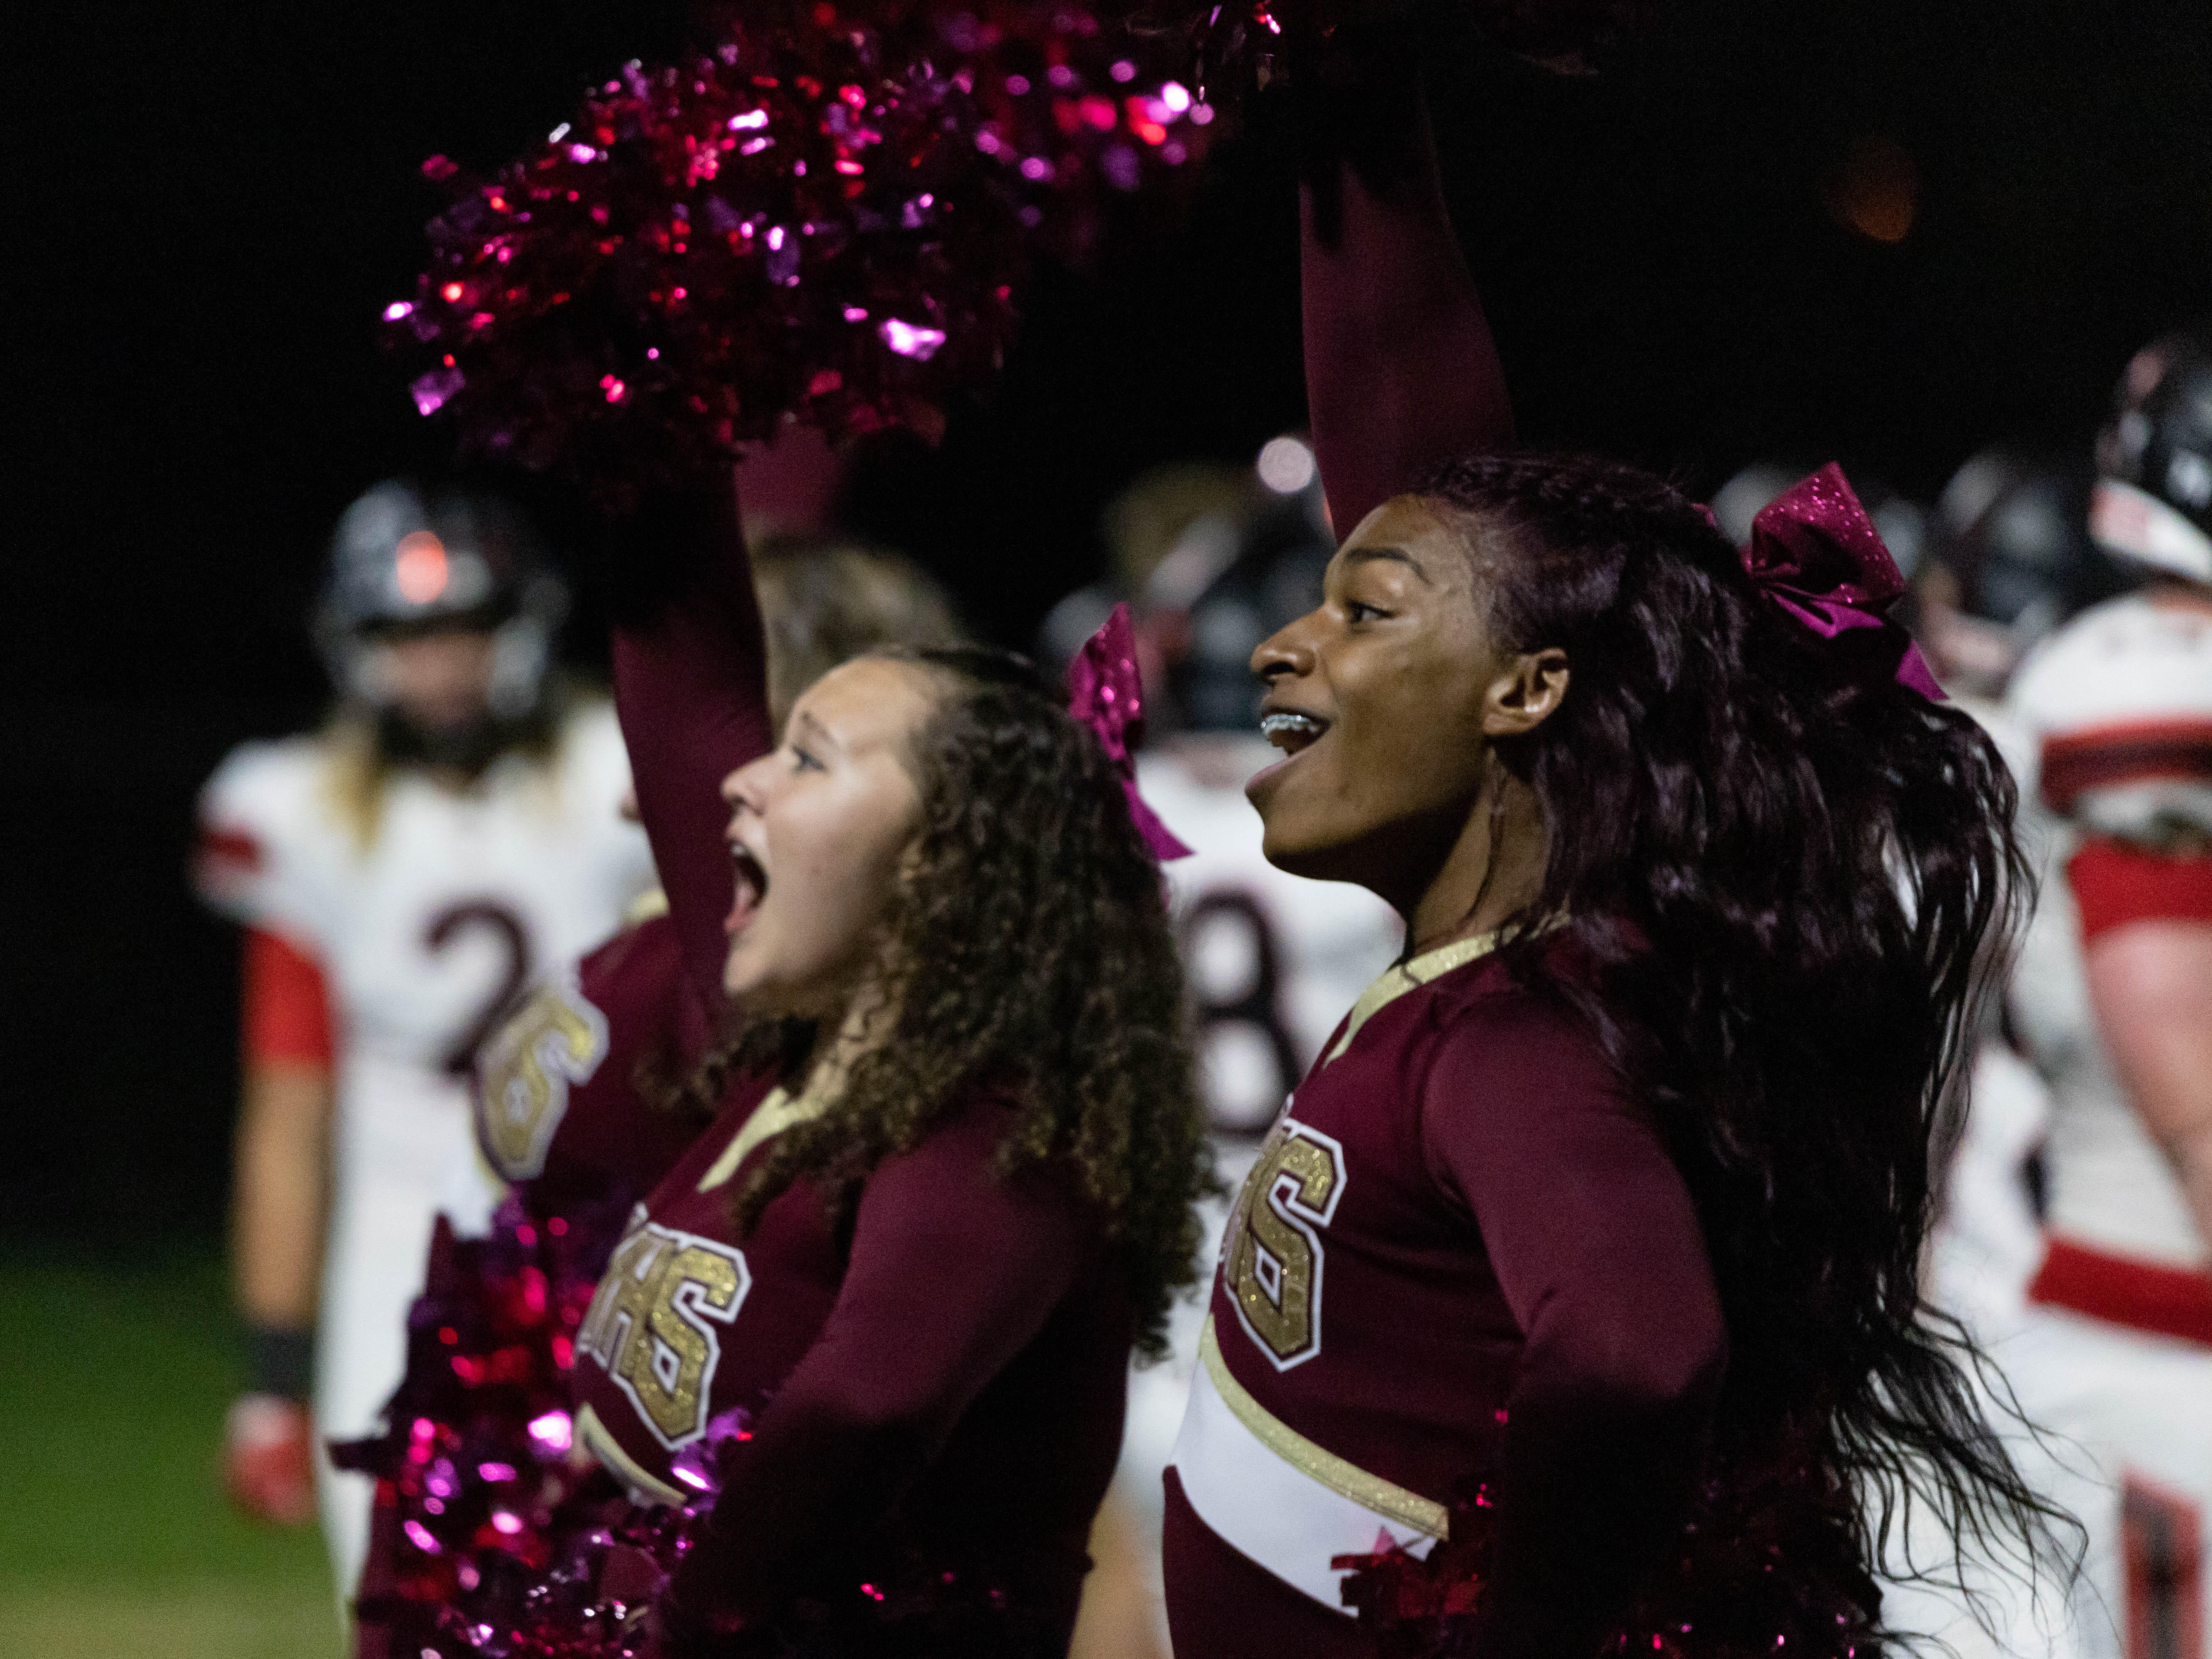 Two cheerleaders raise their pompoms in the air and yell out during a high school football game.